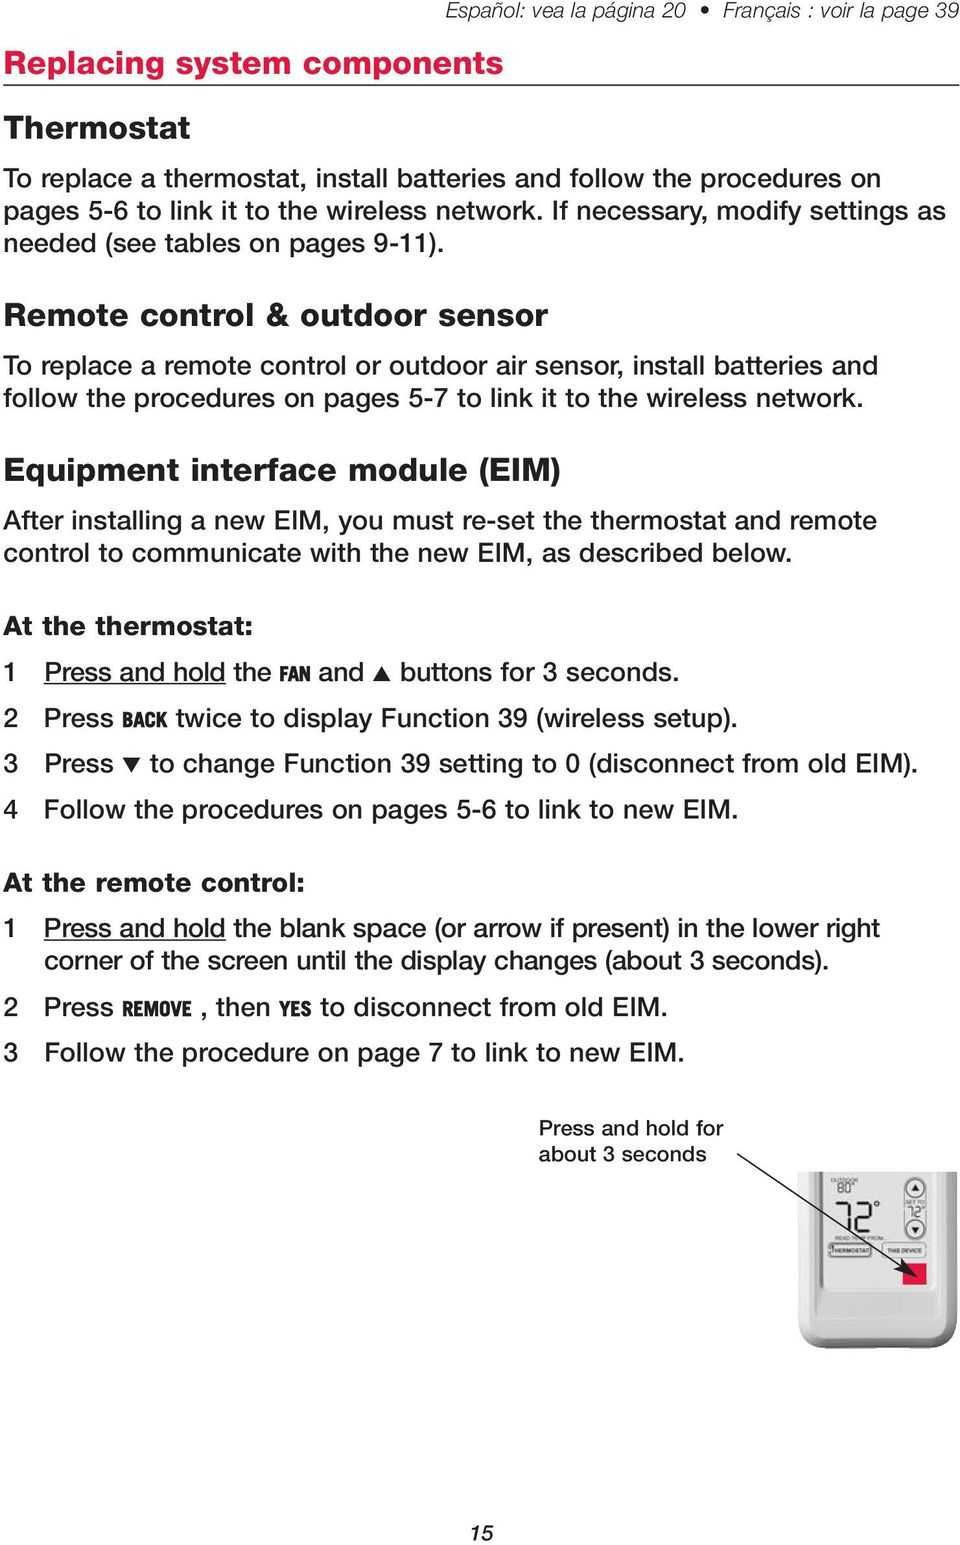 Remote control & outdoor sensor To replace a remote control or outdoor air sensor, install batteries and follow the procedures on pages 5-7 to link it to the wireless network.